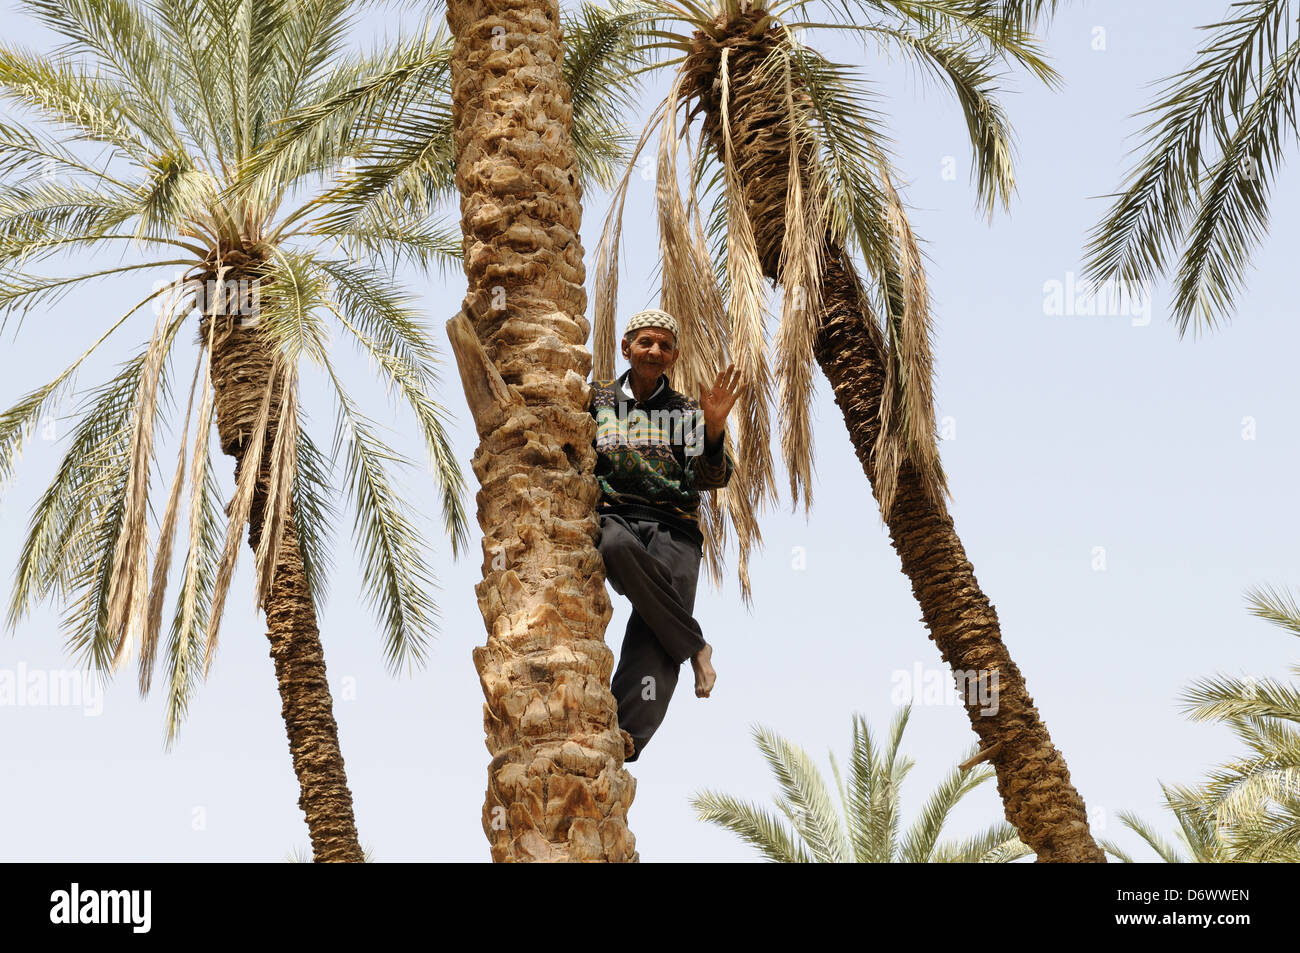 Elderly Tunisian man showing his skill at climbing a date palm tree leaving his hands free to collect dates Tunisia Stock Photo